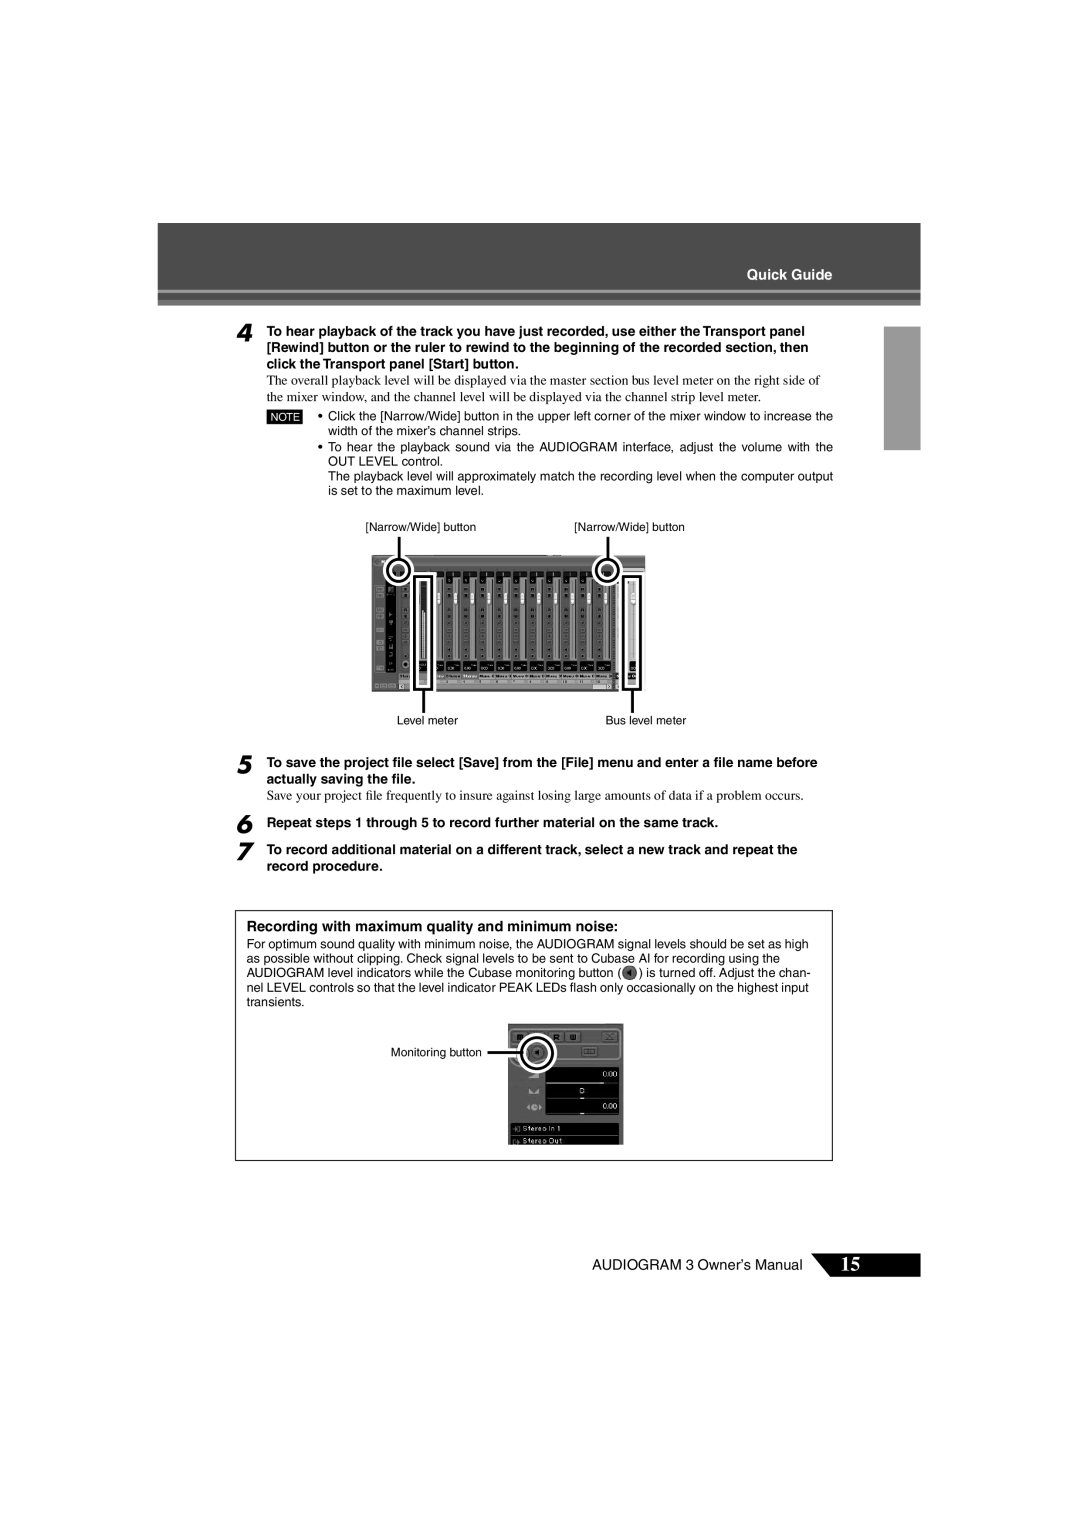 Yamaha Audiogram 3 owner manual Quick Guide, Recording with maximum quality and minimum noise 